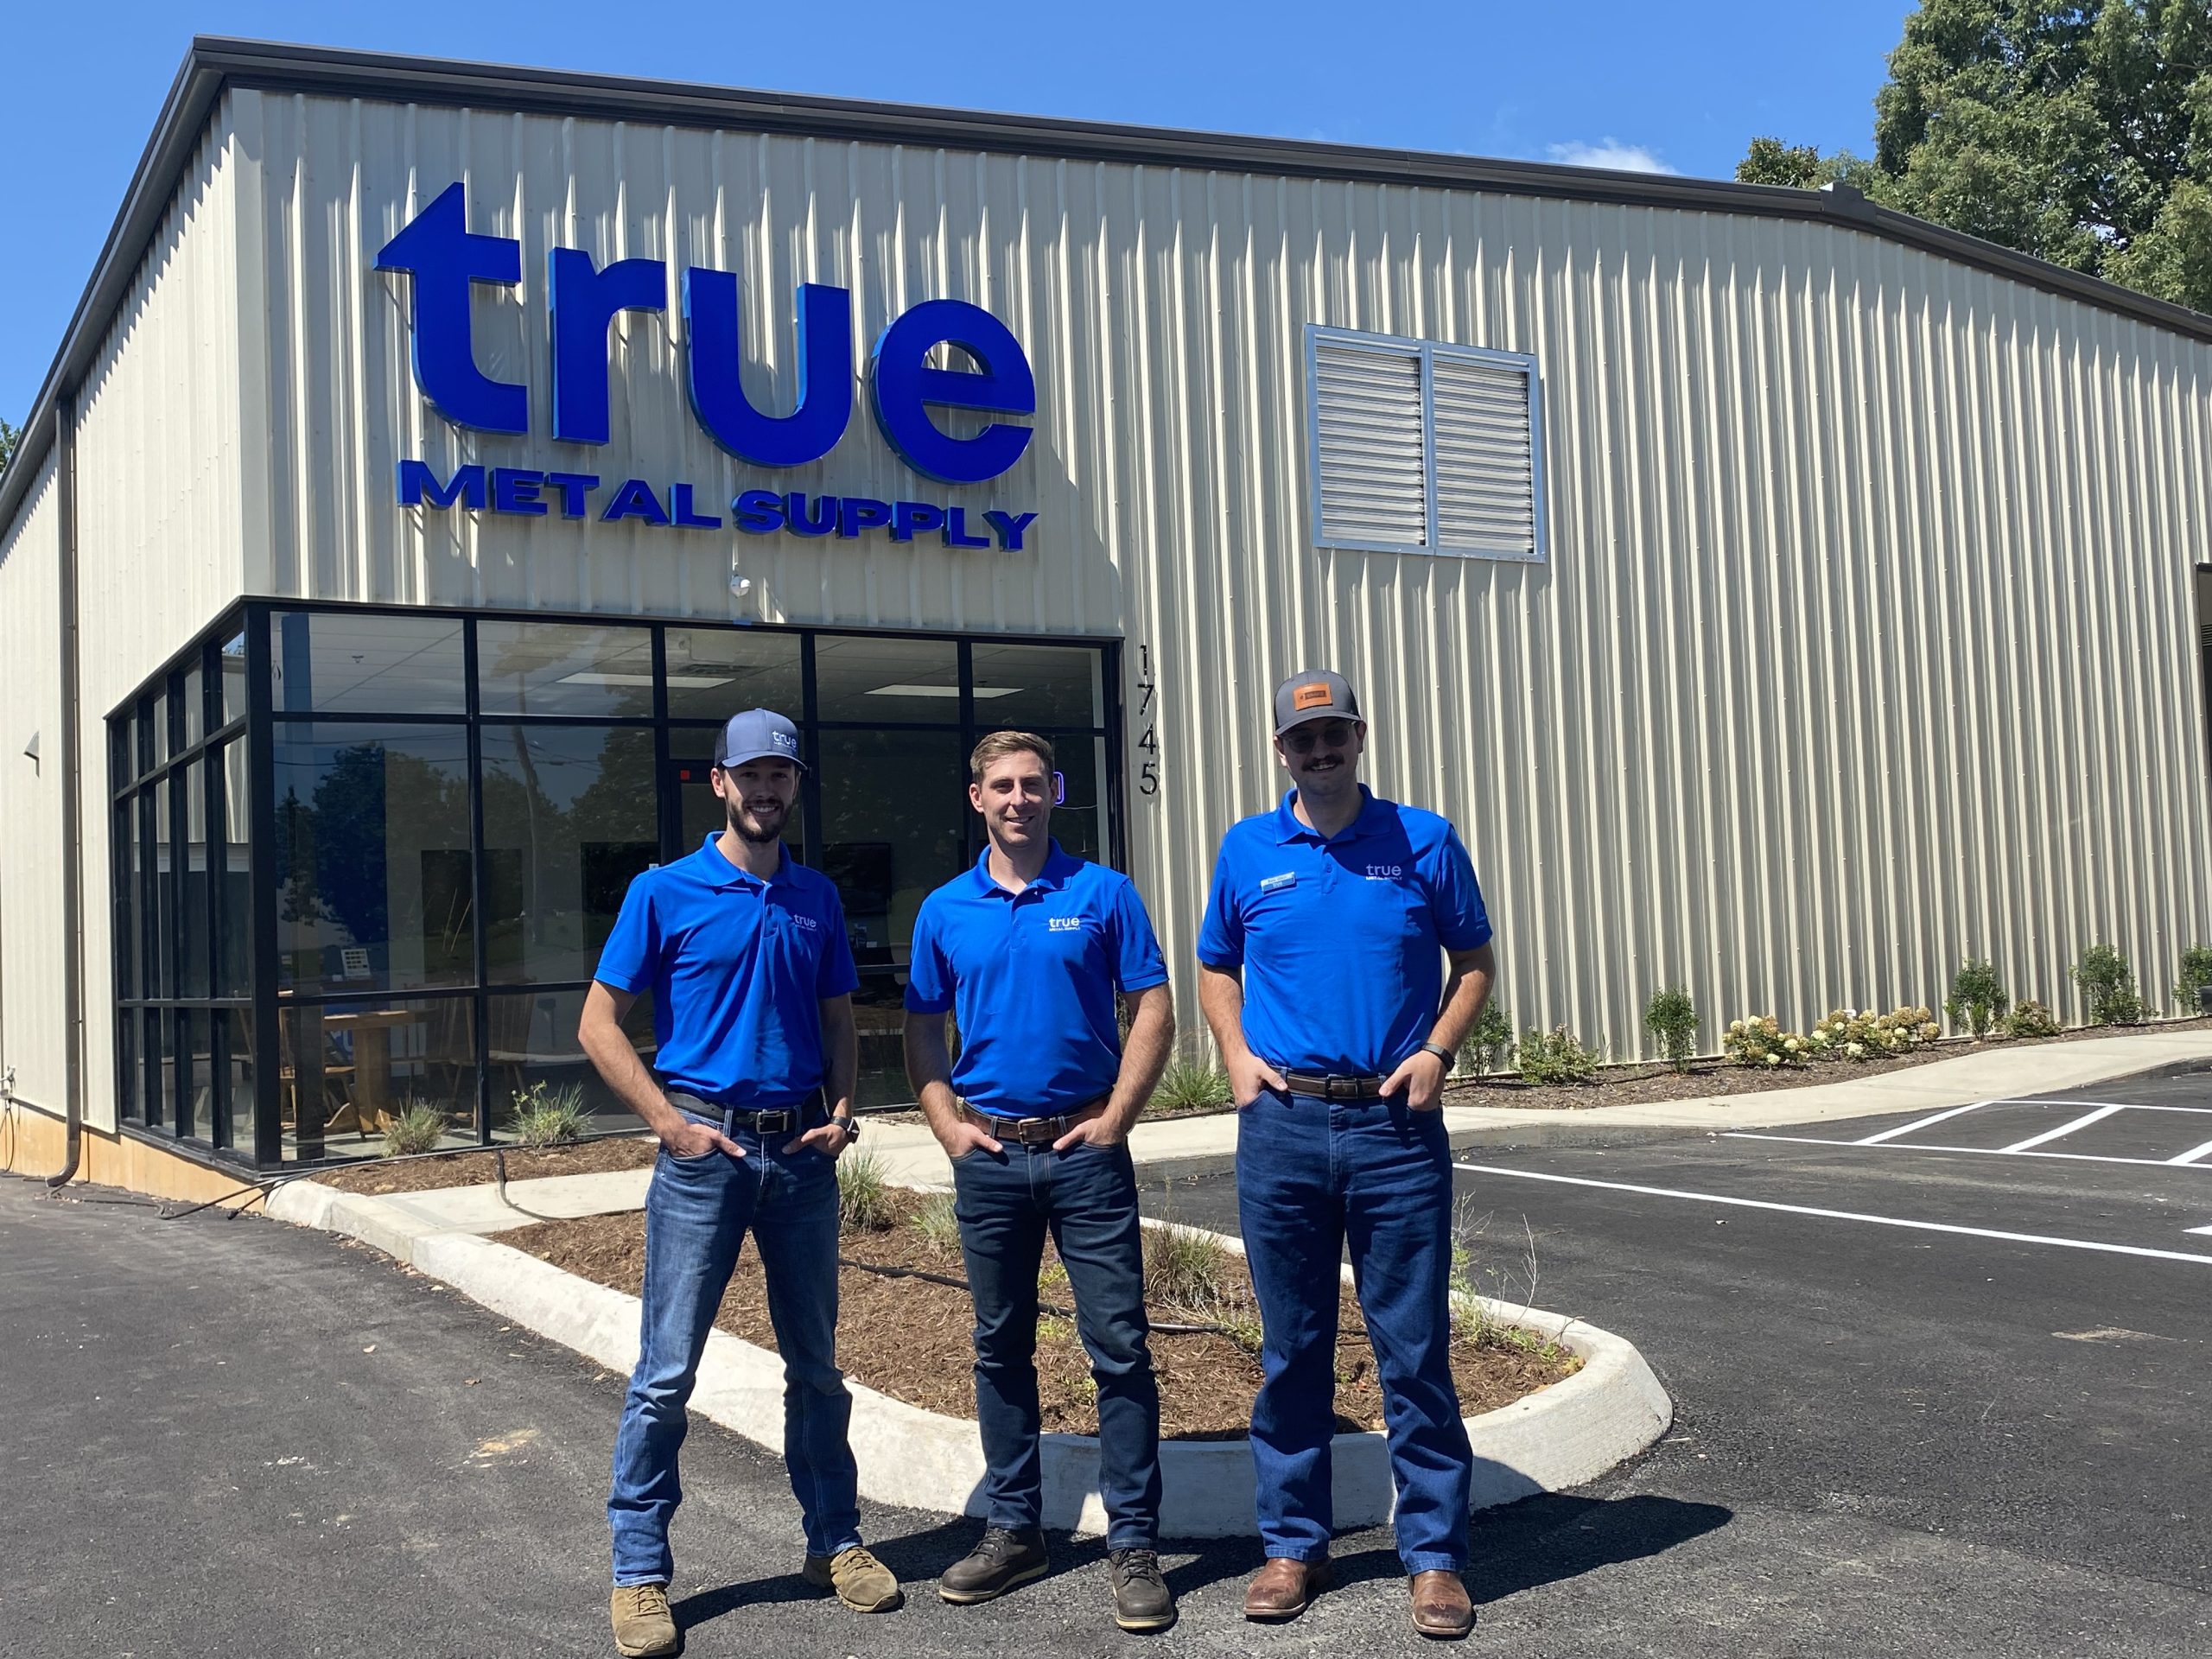 True Metal Supply Taps Into Metal Roofing Opportunities in Knoxville